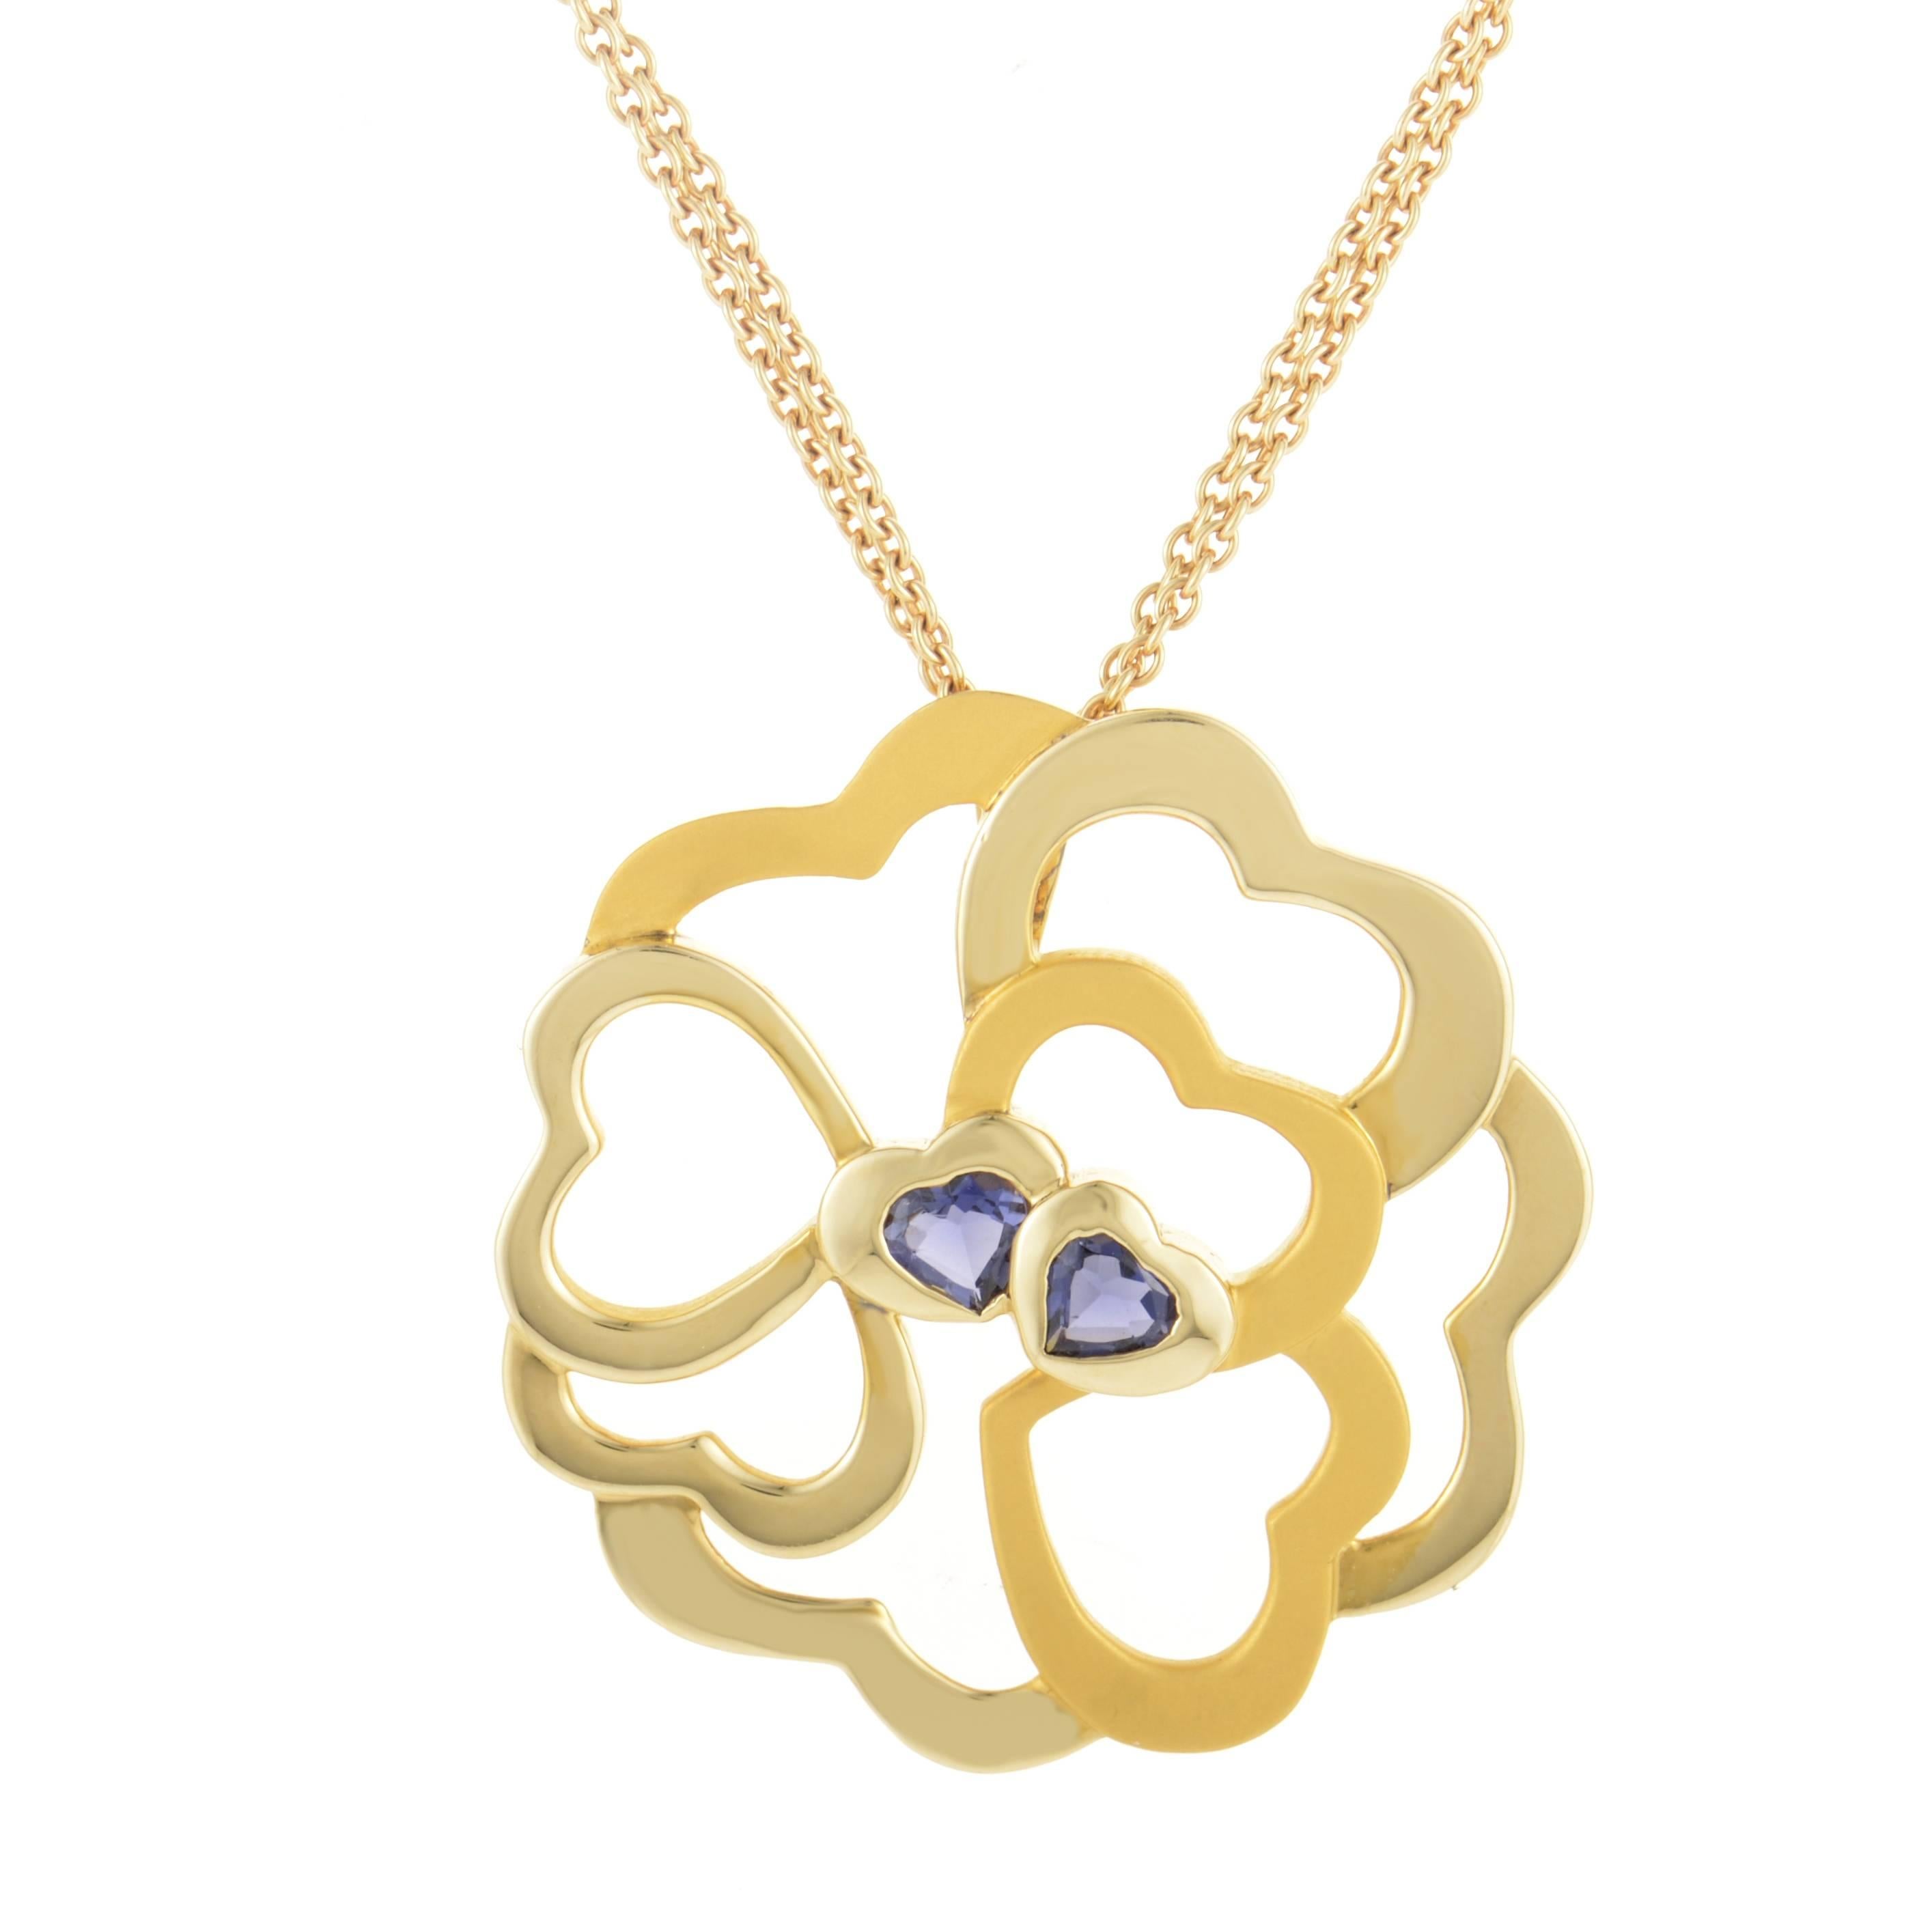 Carrera y Carrera 18 Karat Gold and Iolite Heart Cluster Large Pendant Necklace